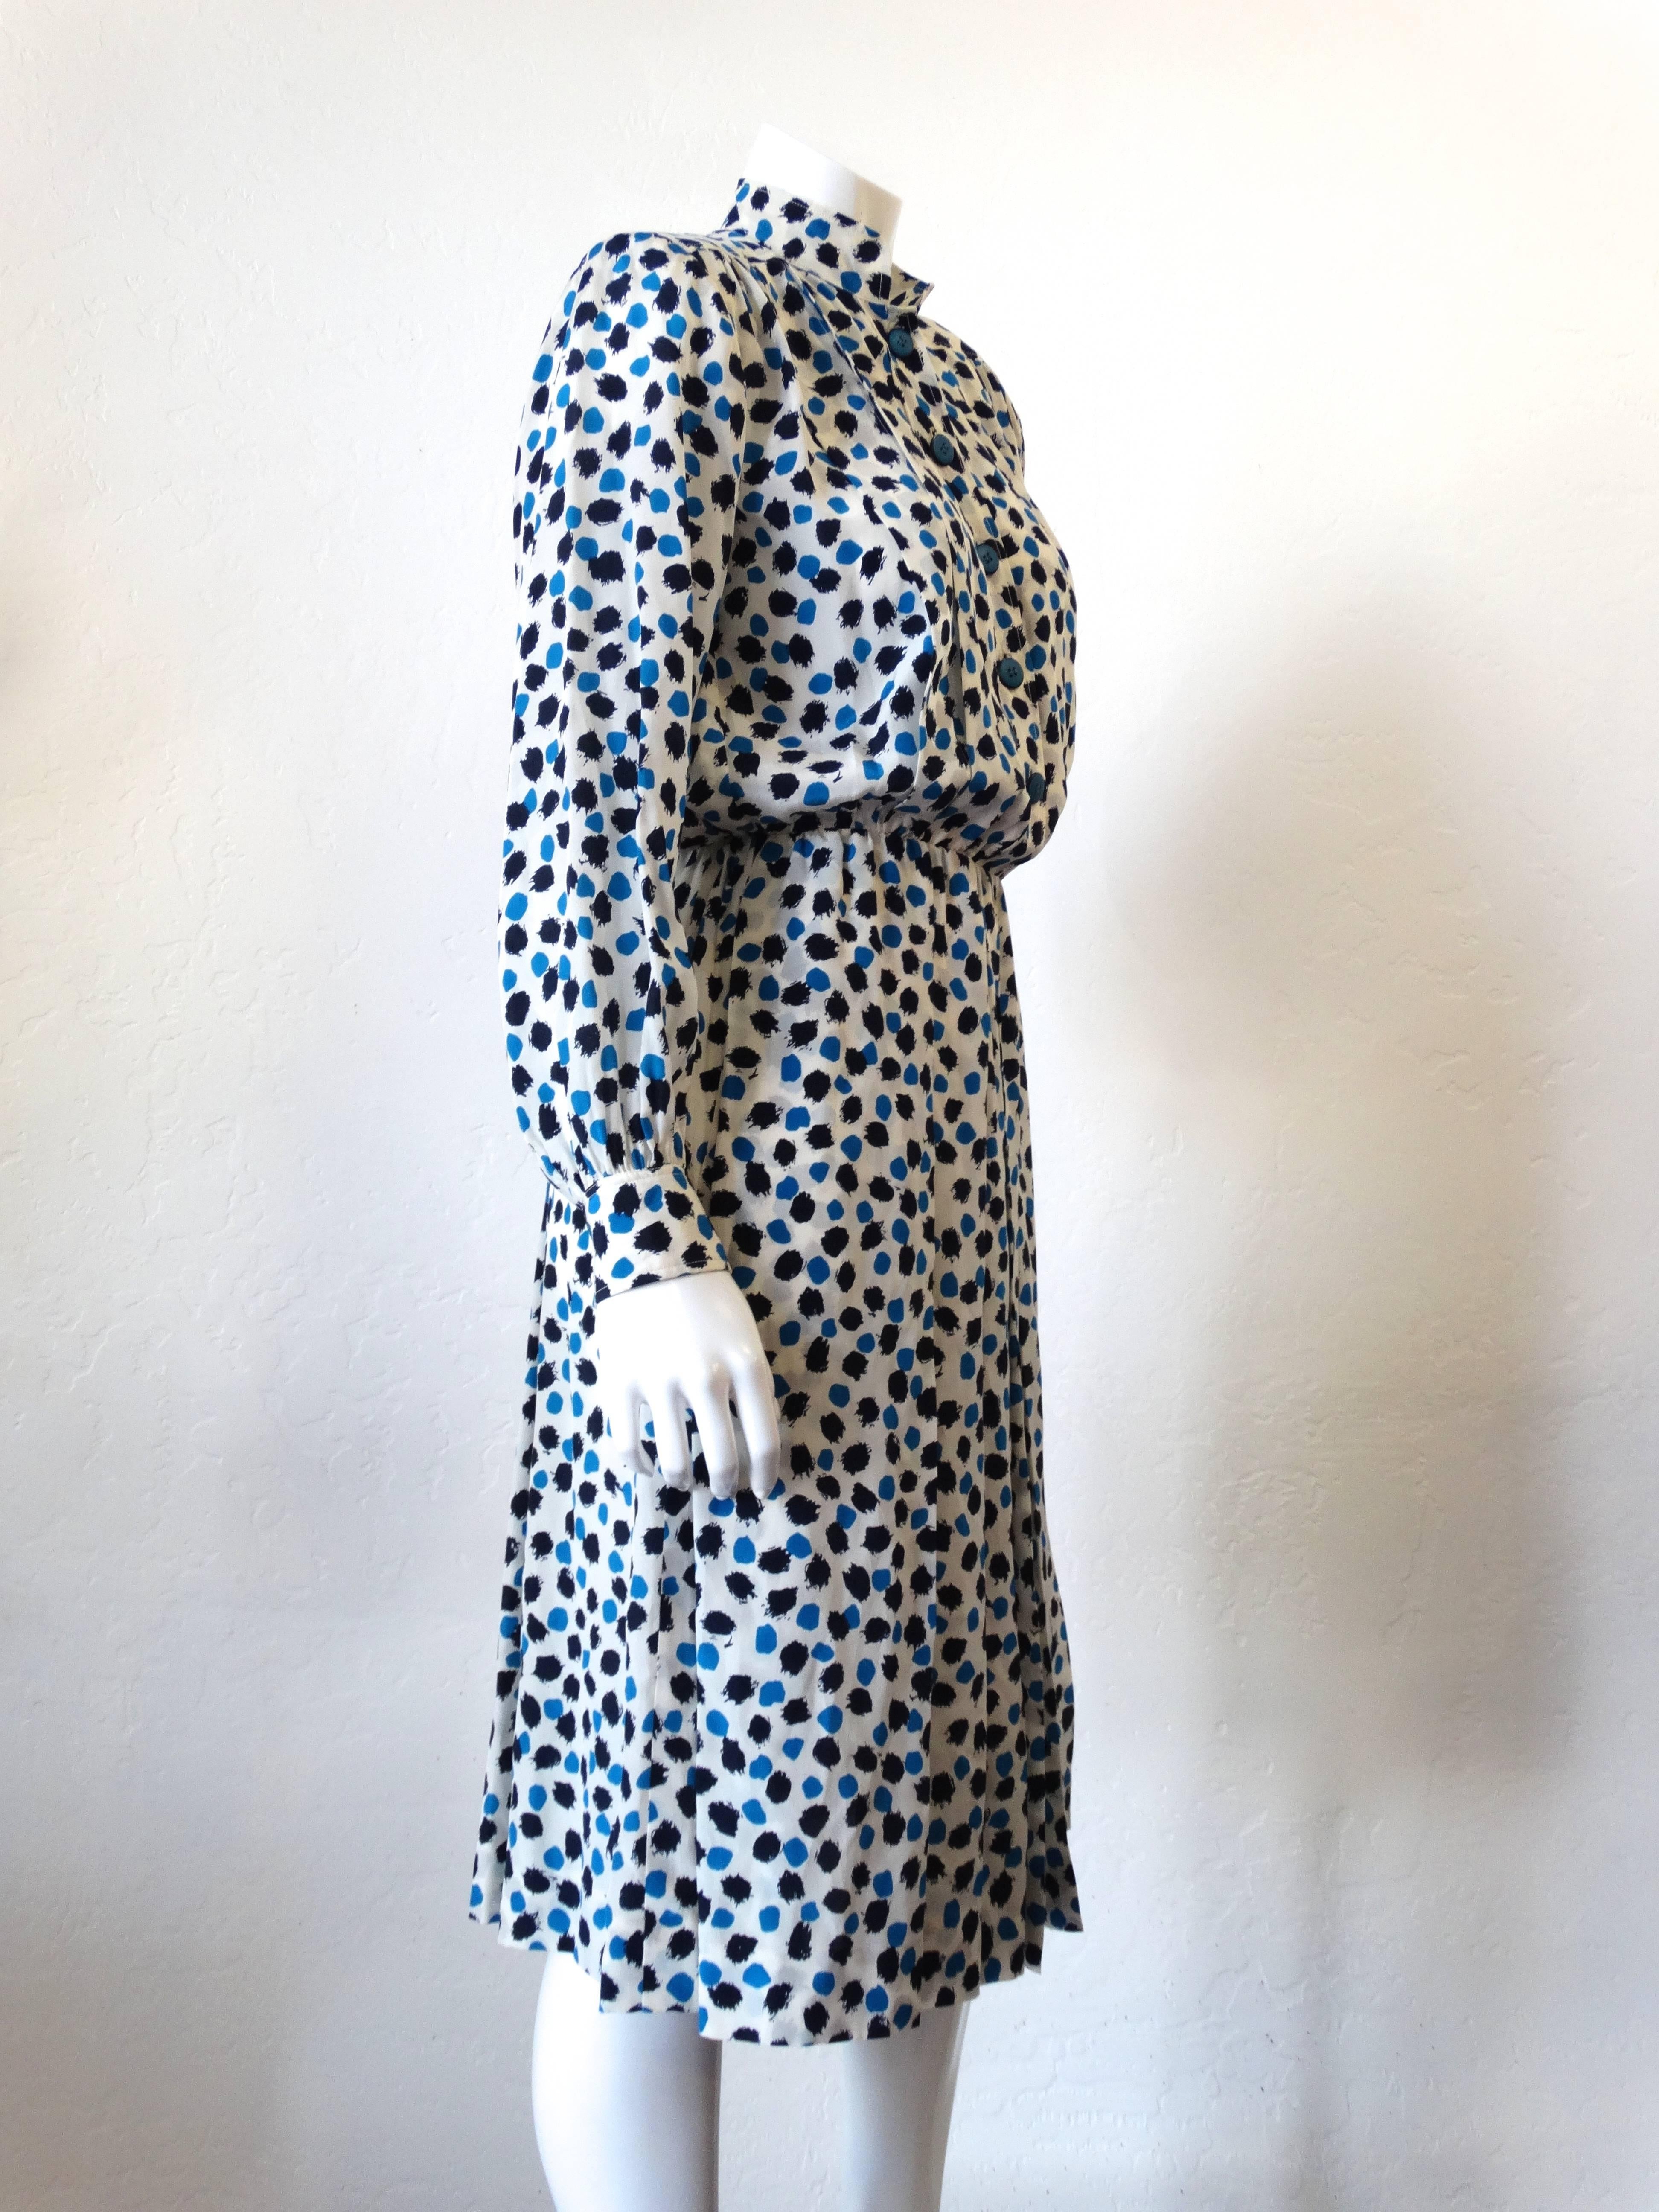 Vintage Yves Saint Laurent knee length silk secretary dress featuring an allover dot print, front button placket at the bodice, and a side zip entrance. Circa 1984, Made in France (Belt not included it is listed in my shop) Marked size 36